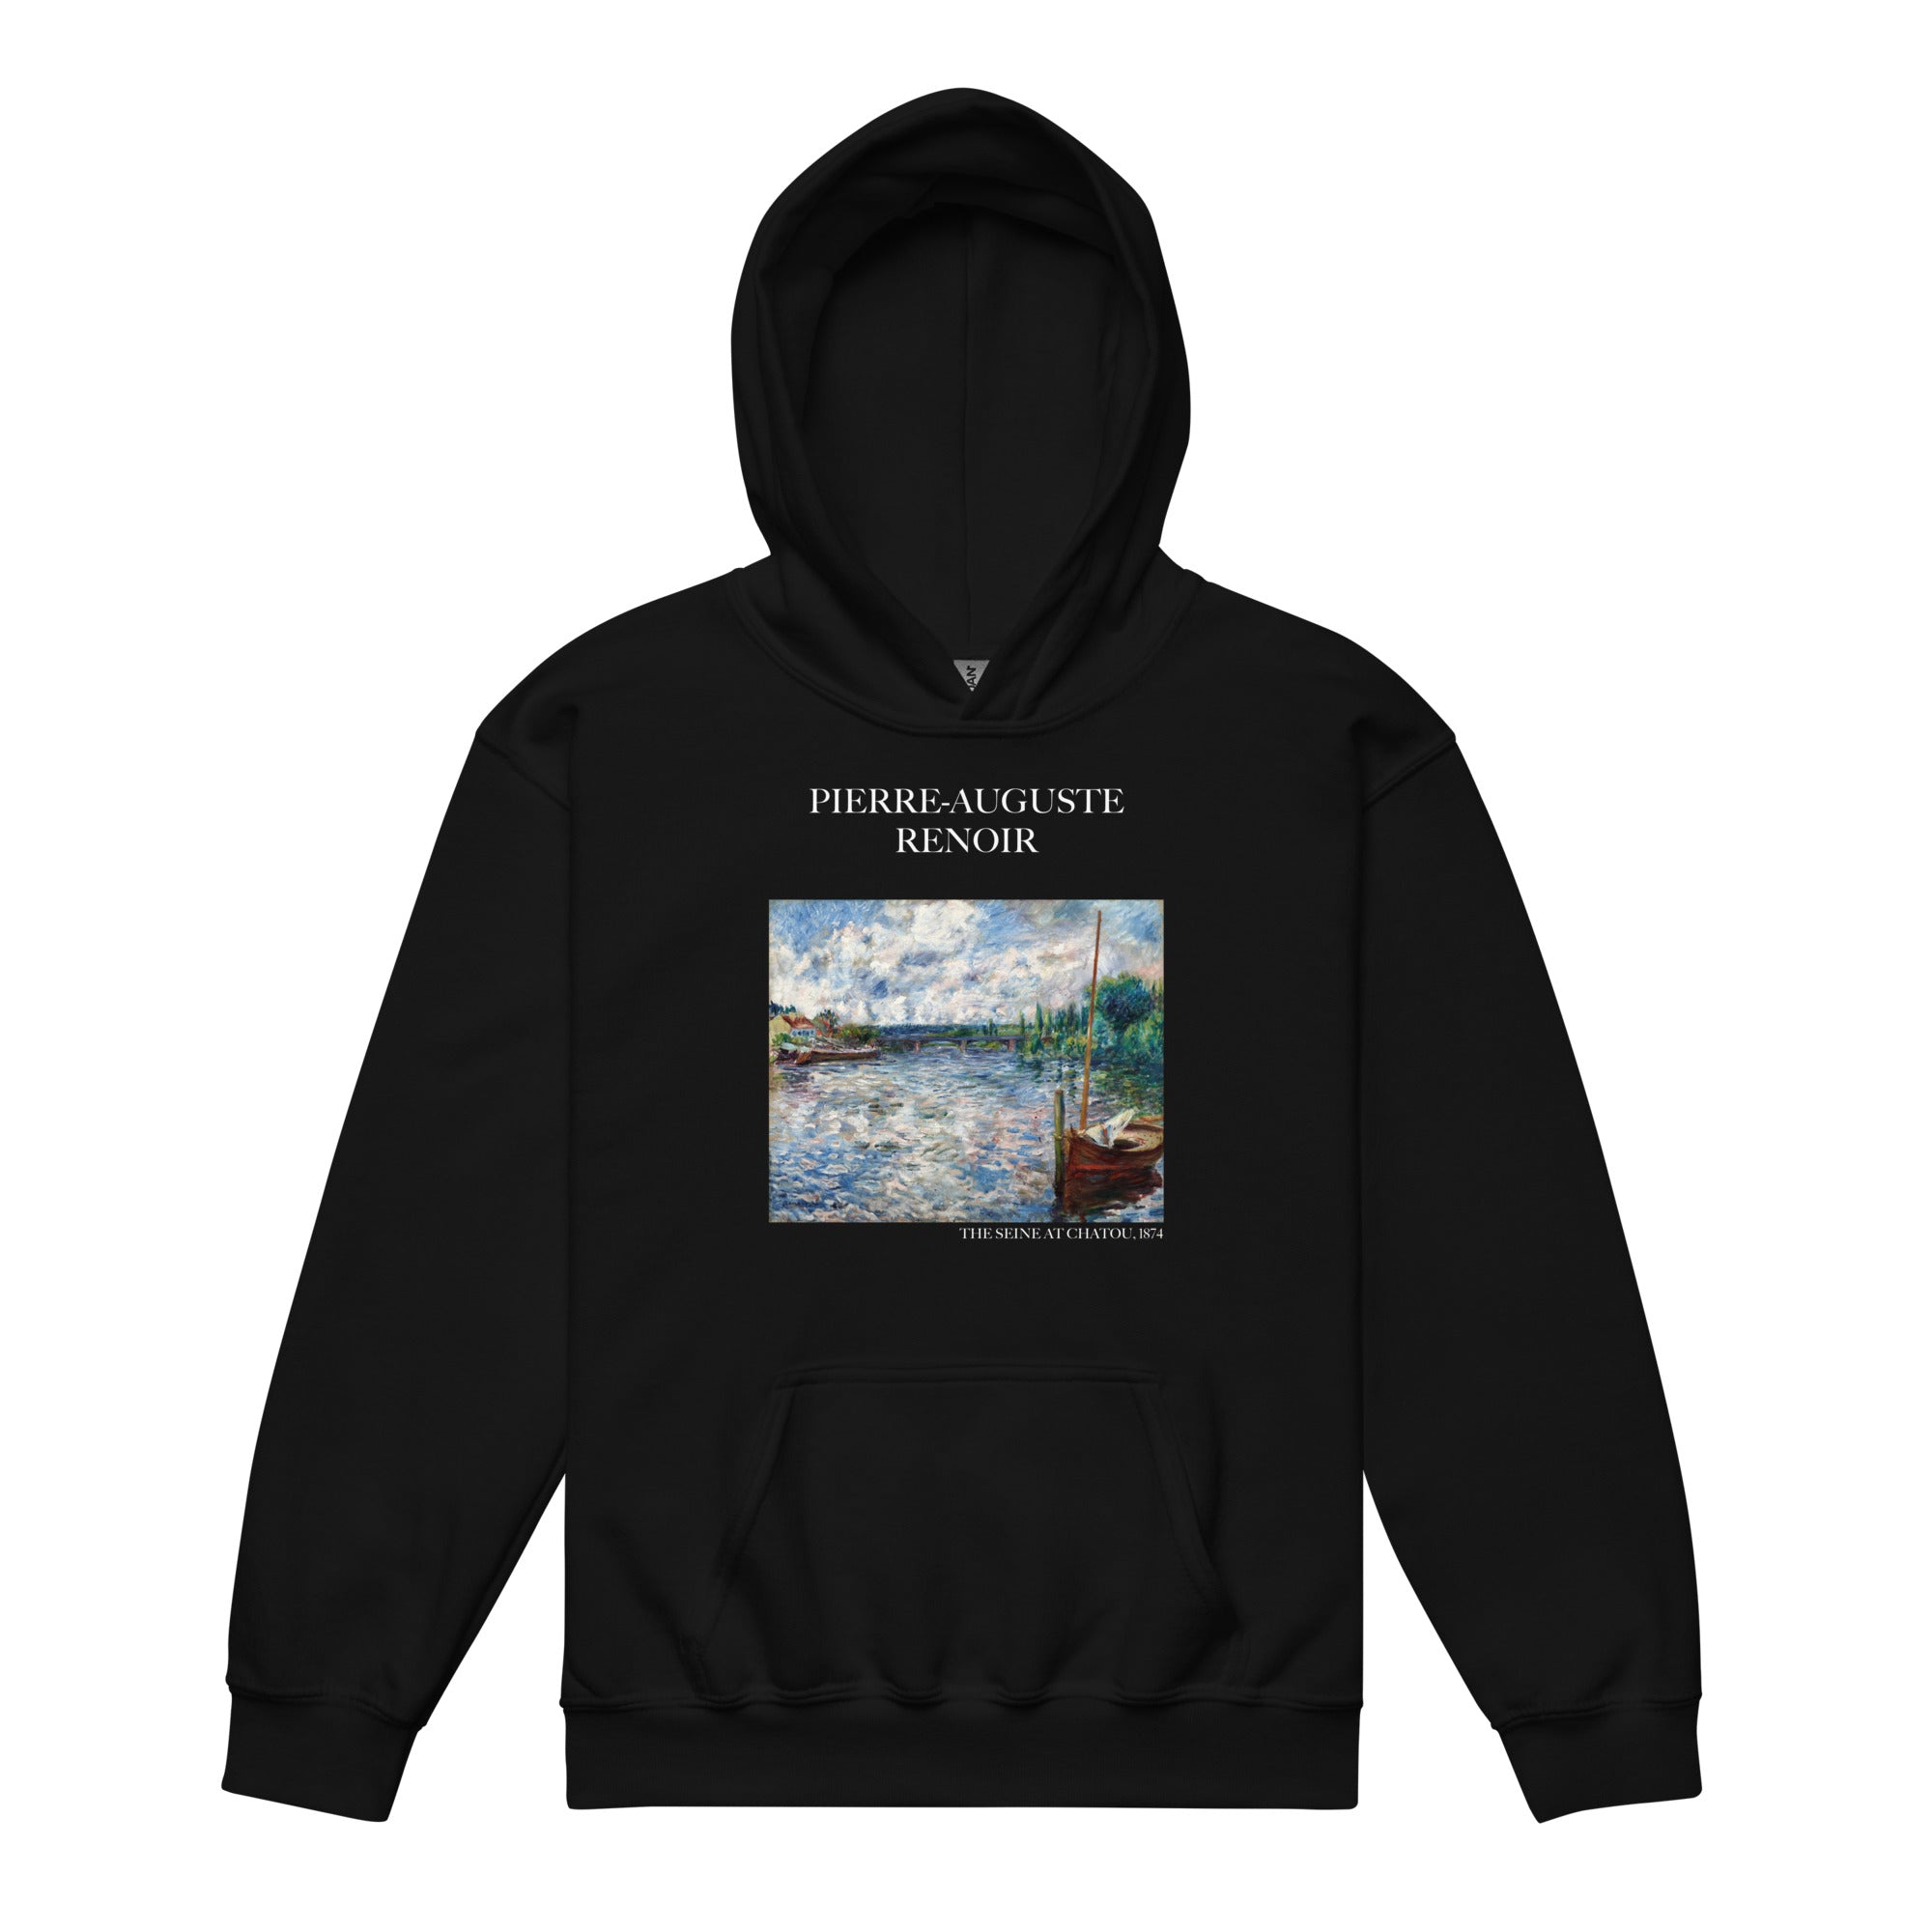 Pierre-Auguste Renoir 'The Seine at Chatou' Famous Painting Hoodie | Premium Youth Art Hoodie